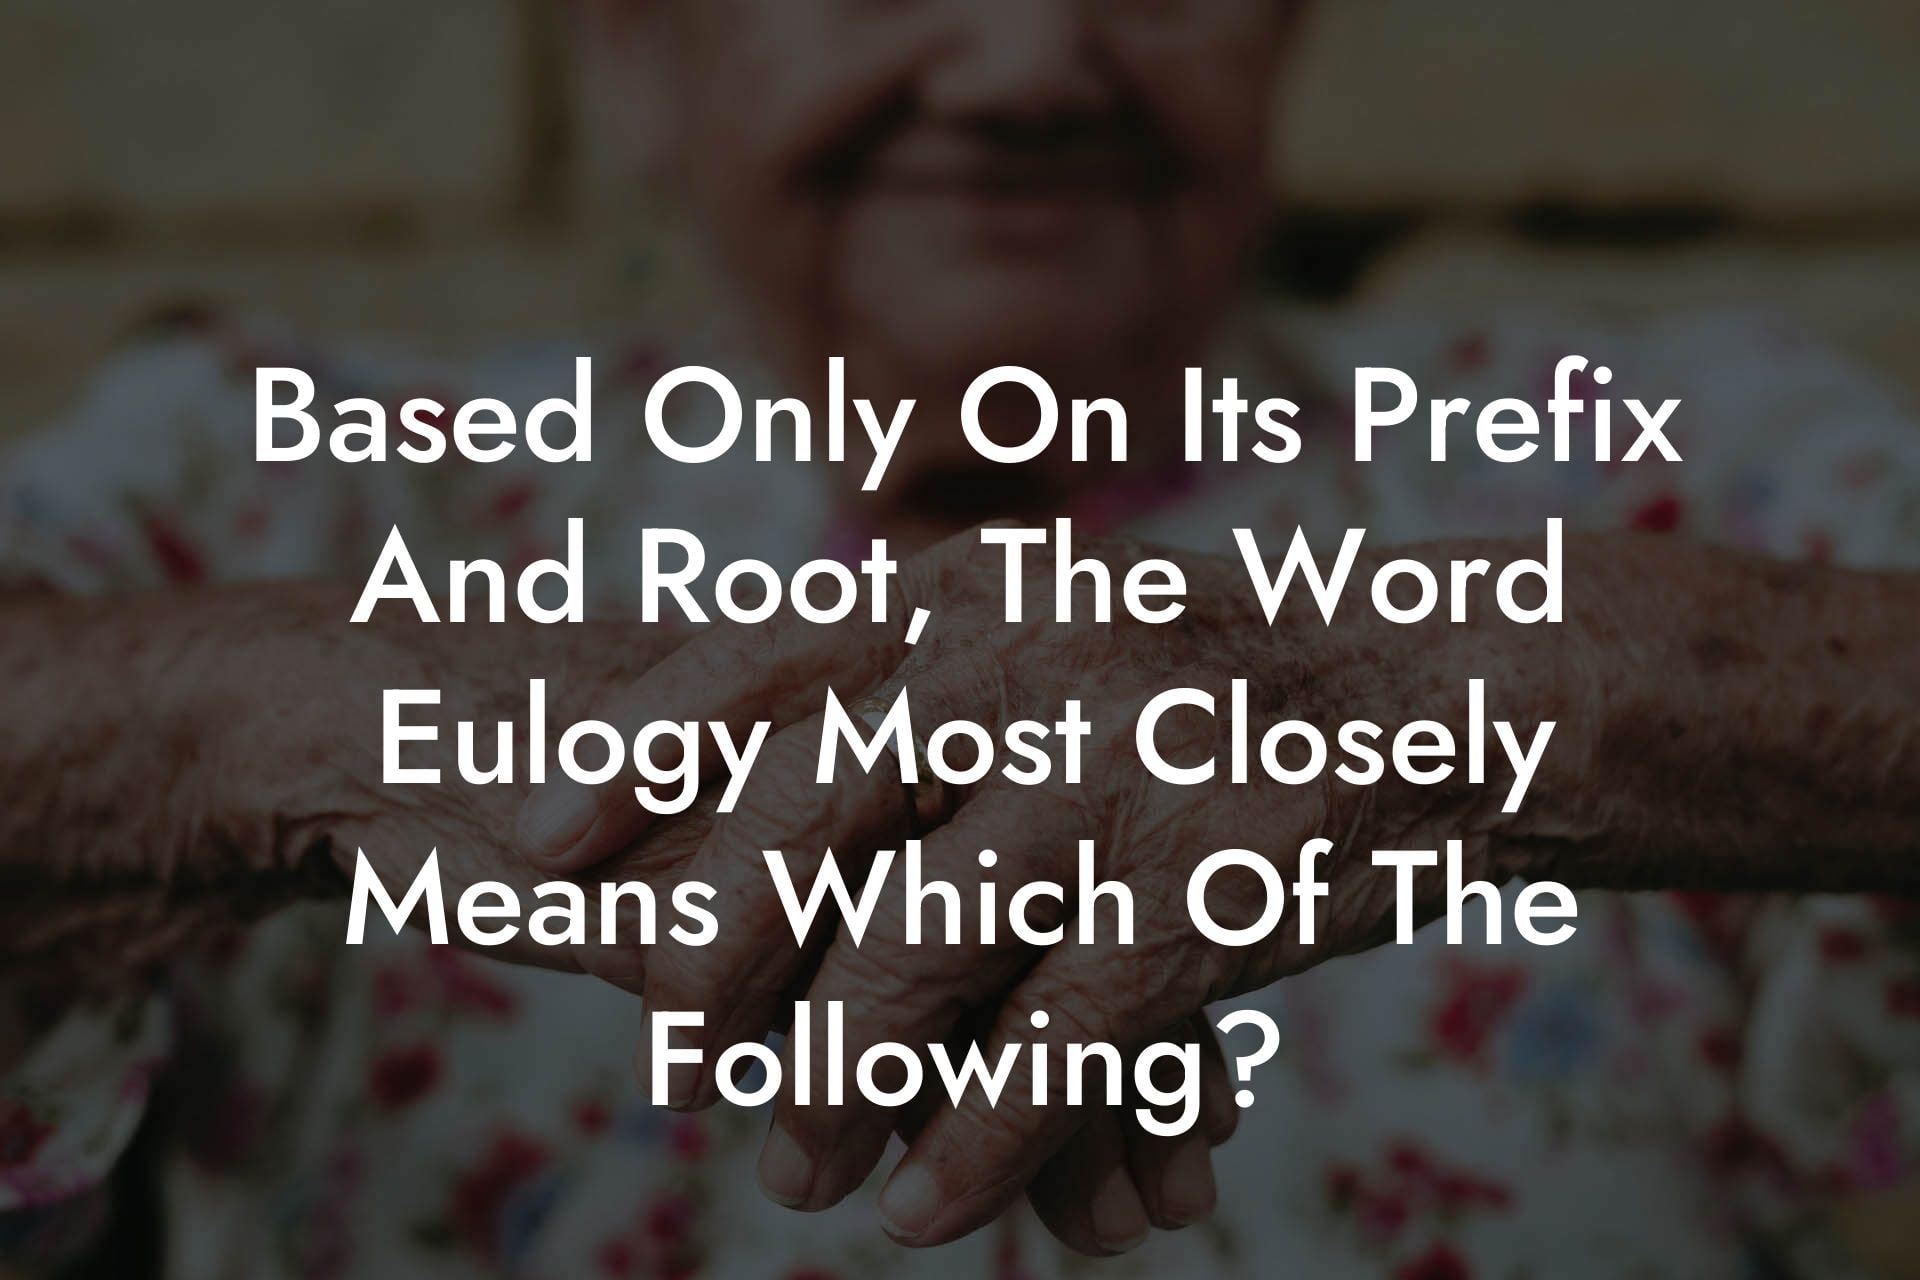 Based Only On Its Prefix And Root, The Word Eulogy Most Closely Means Which Of The Following?